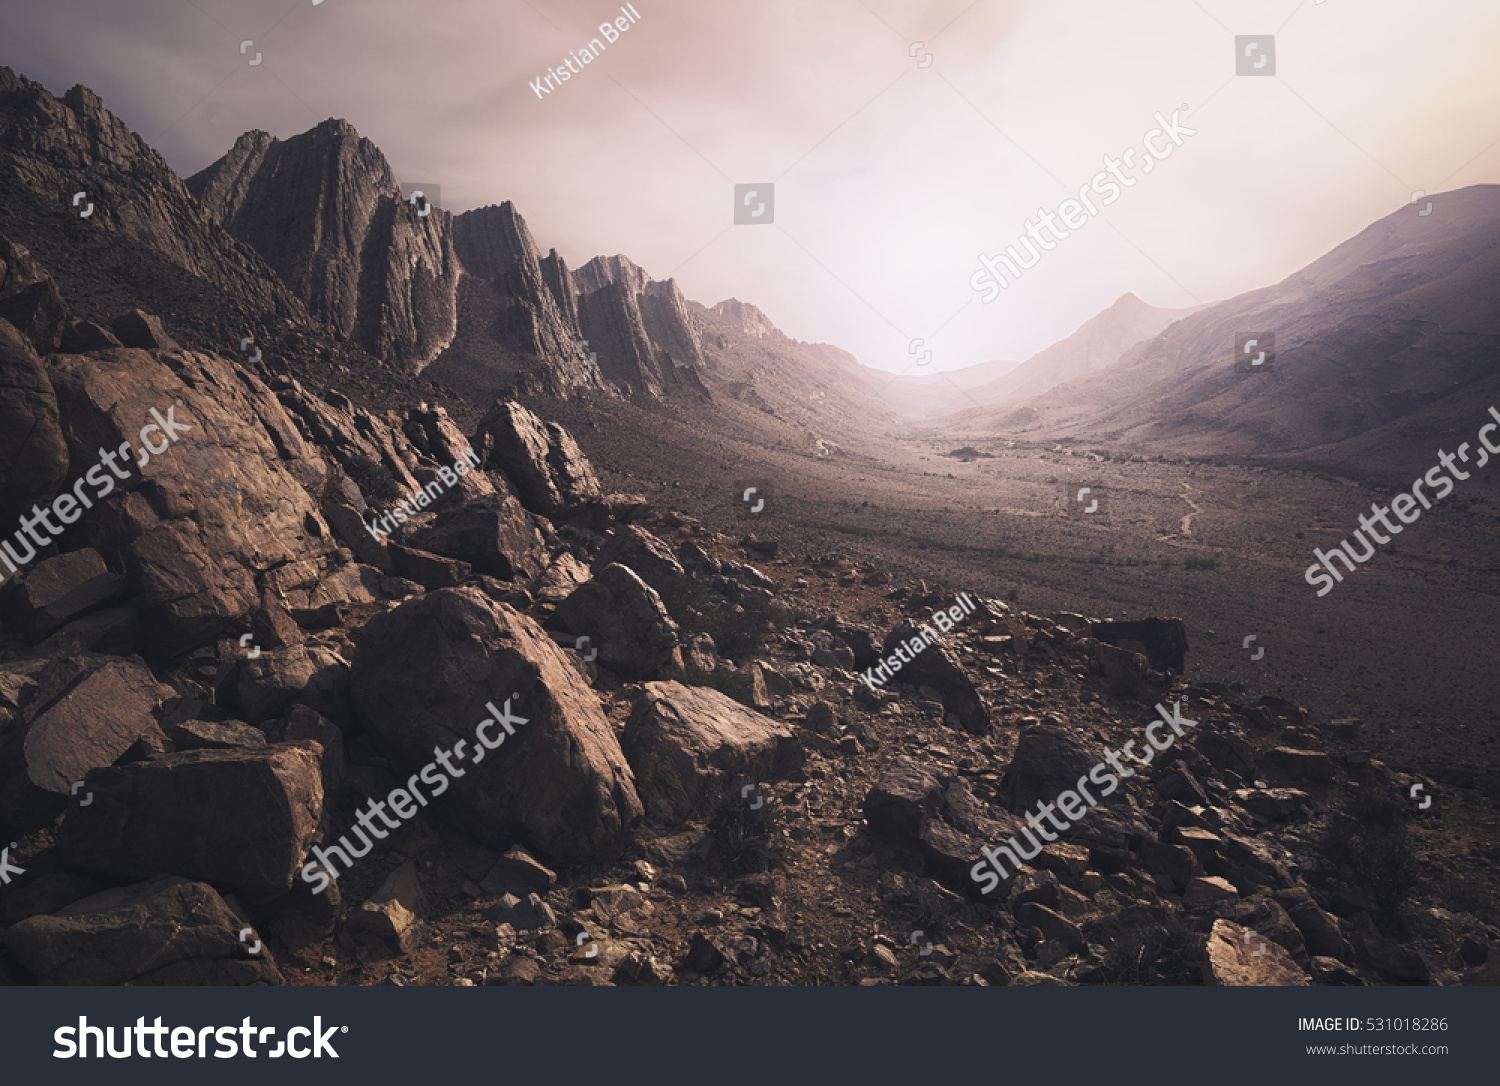 Parched, rocky desert landscape in southern Morocco #531018286